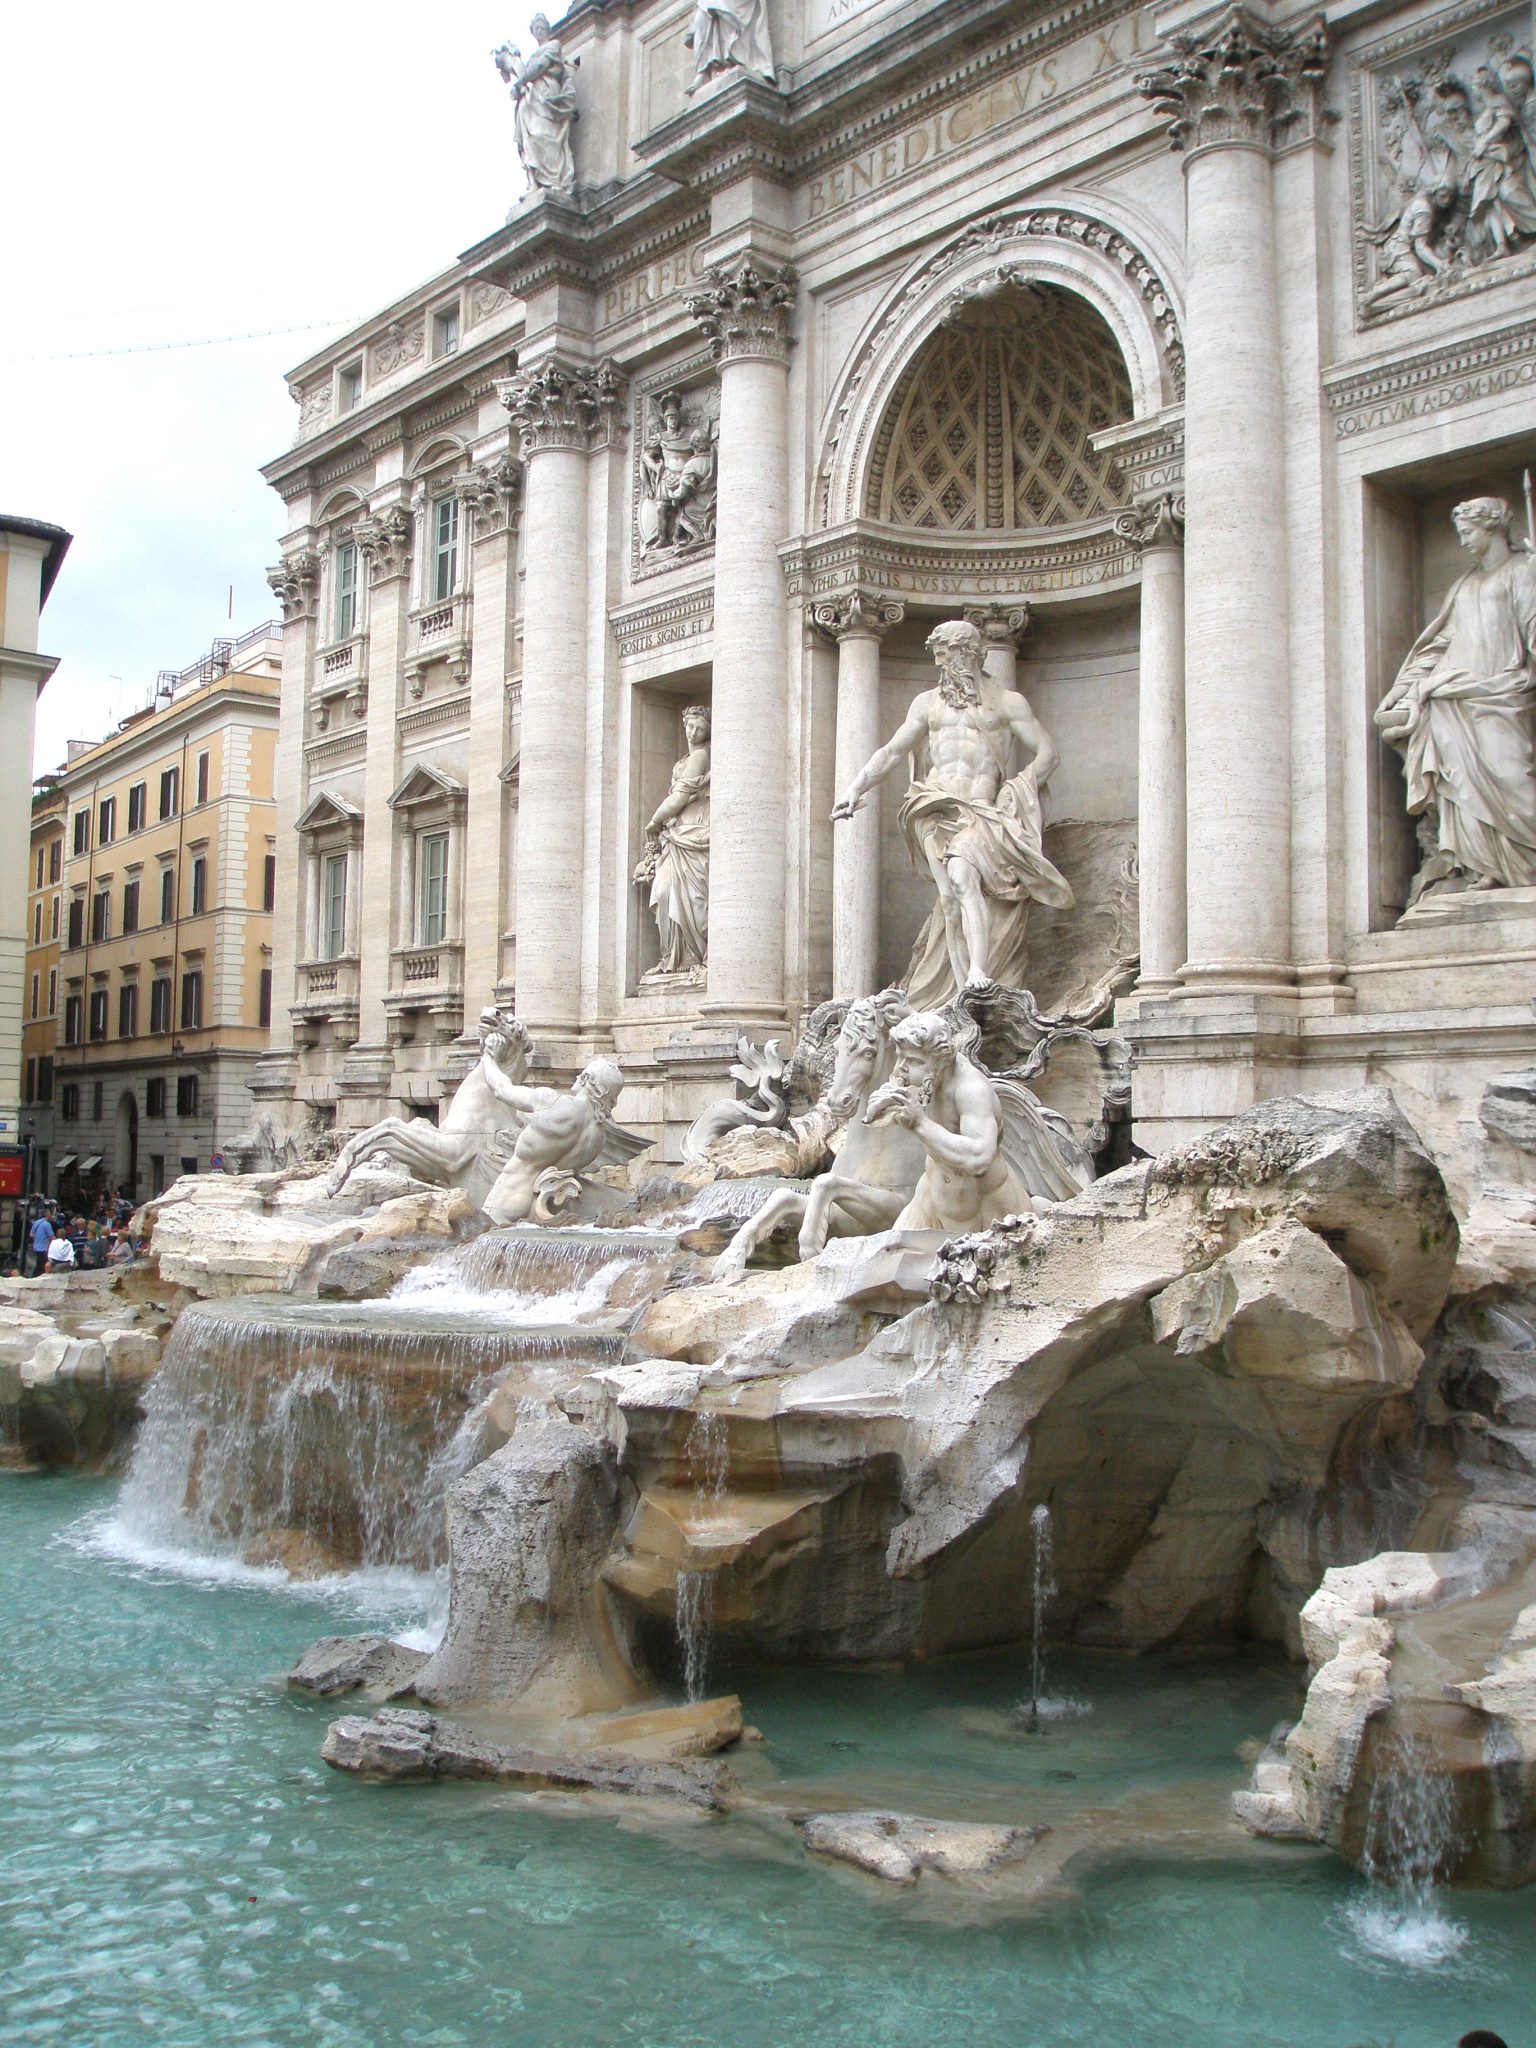 My farewell glance at the Trevi Fountain.